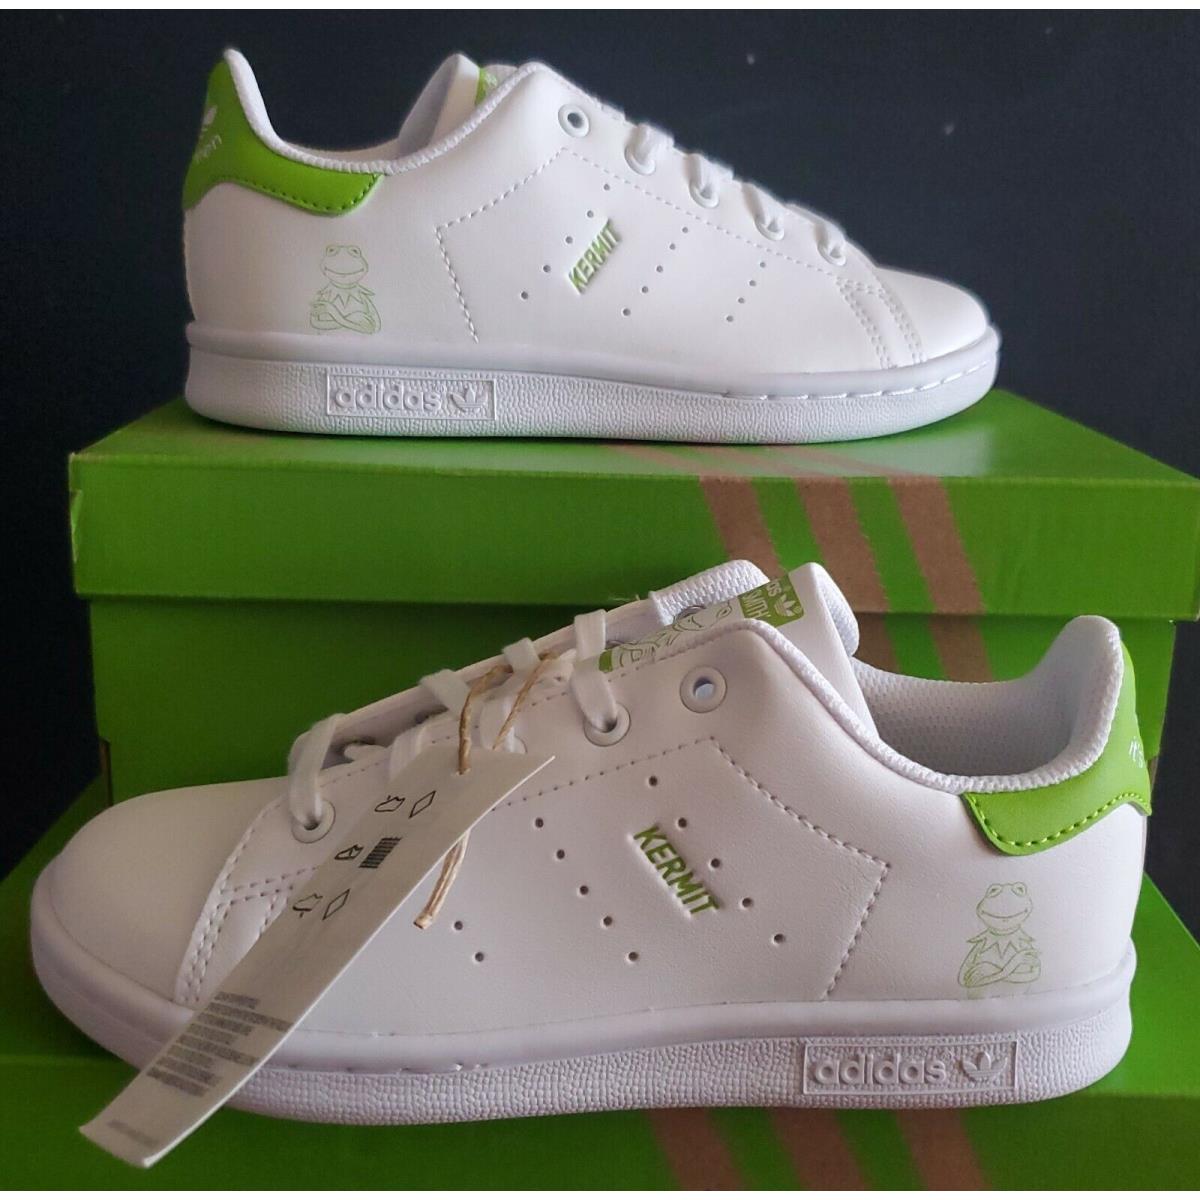 Adidas X The Muppets Stan Smith Kermit The Frog PS Shoes US 11K -- 3